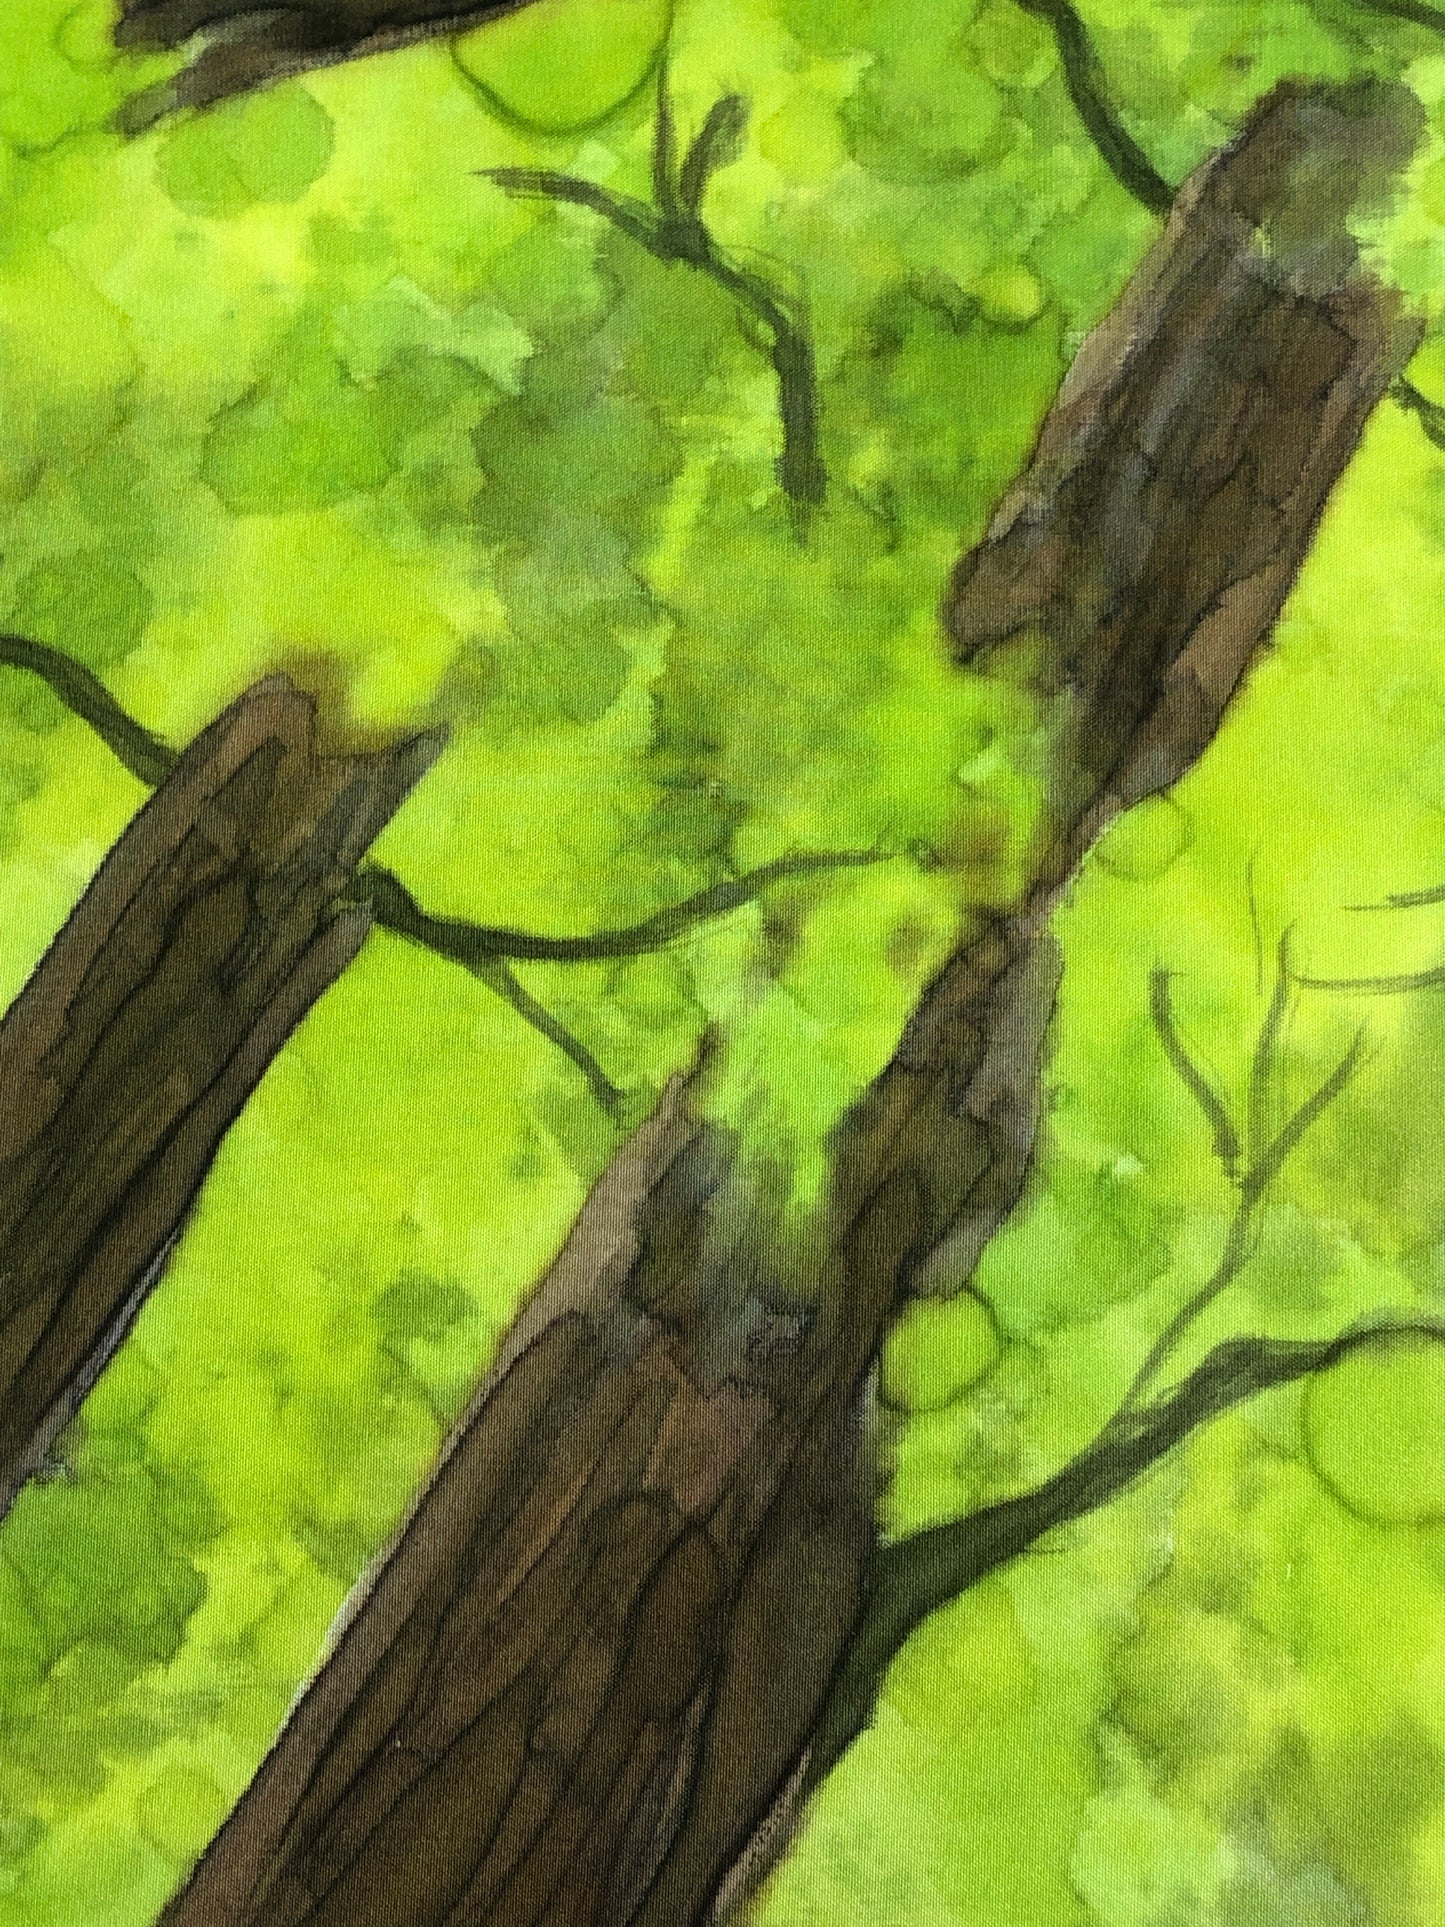 “The Canopy” - Painting on Silk - Sold